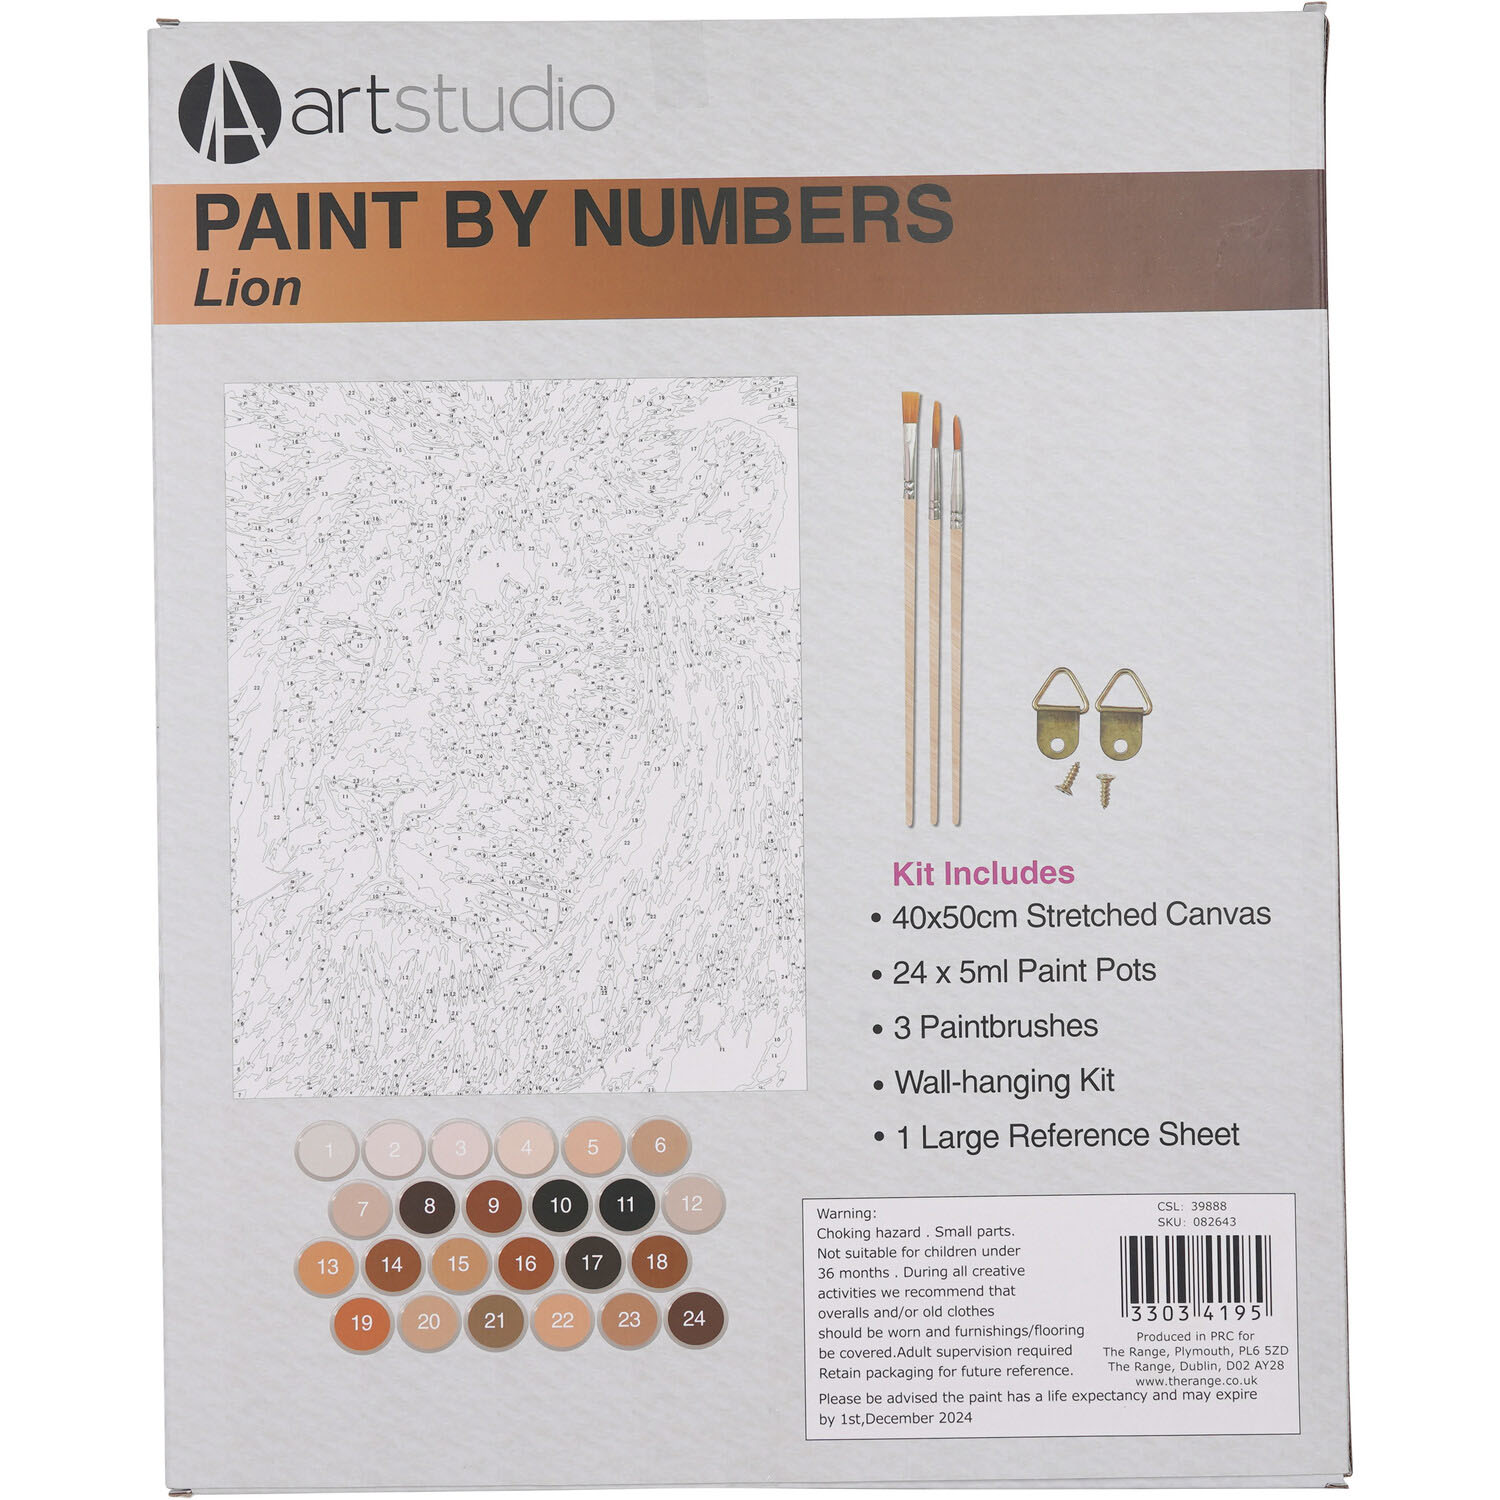 Paint by Numbers Lion or White Tiger Image 6